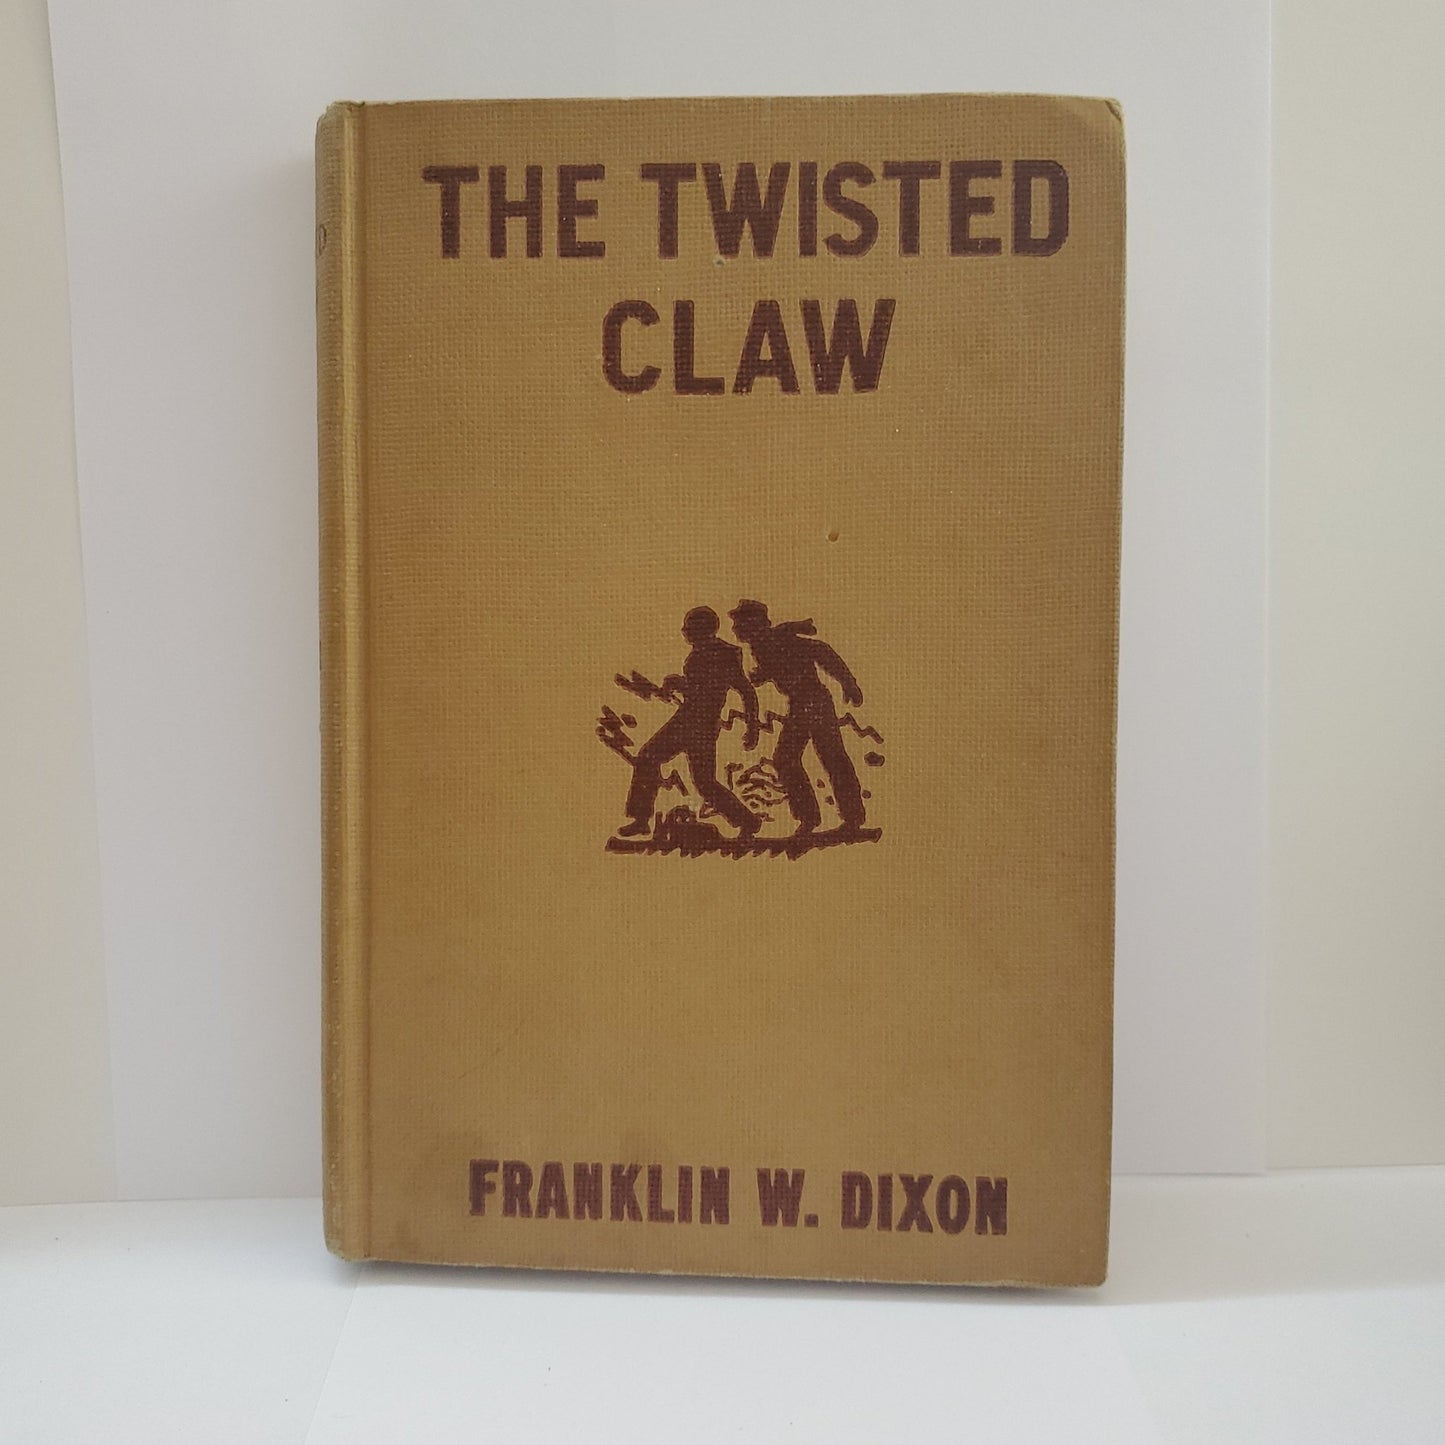 The Twisted Claw - [ash-ling] Booksellers